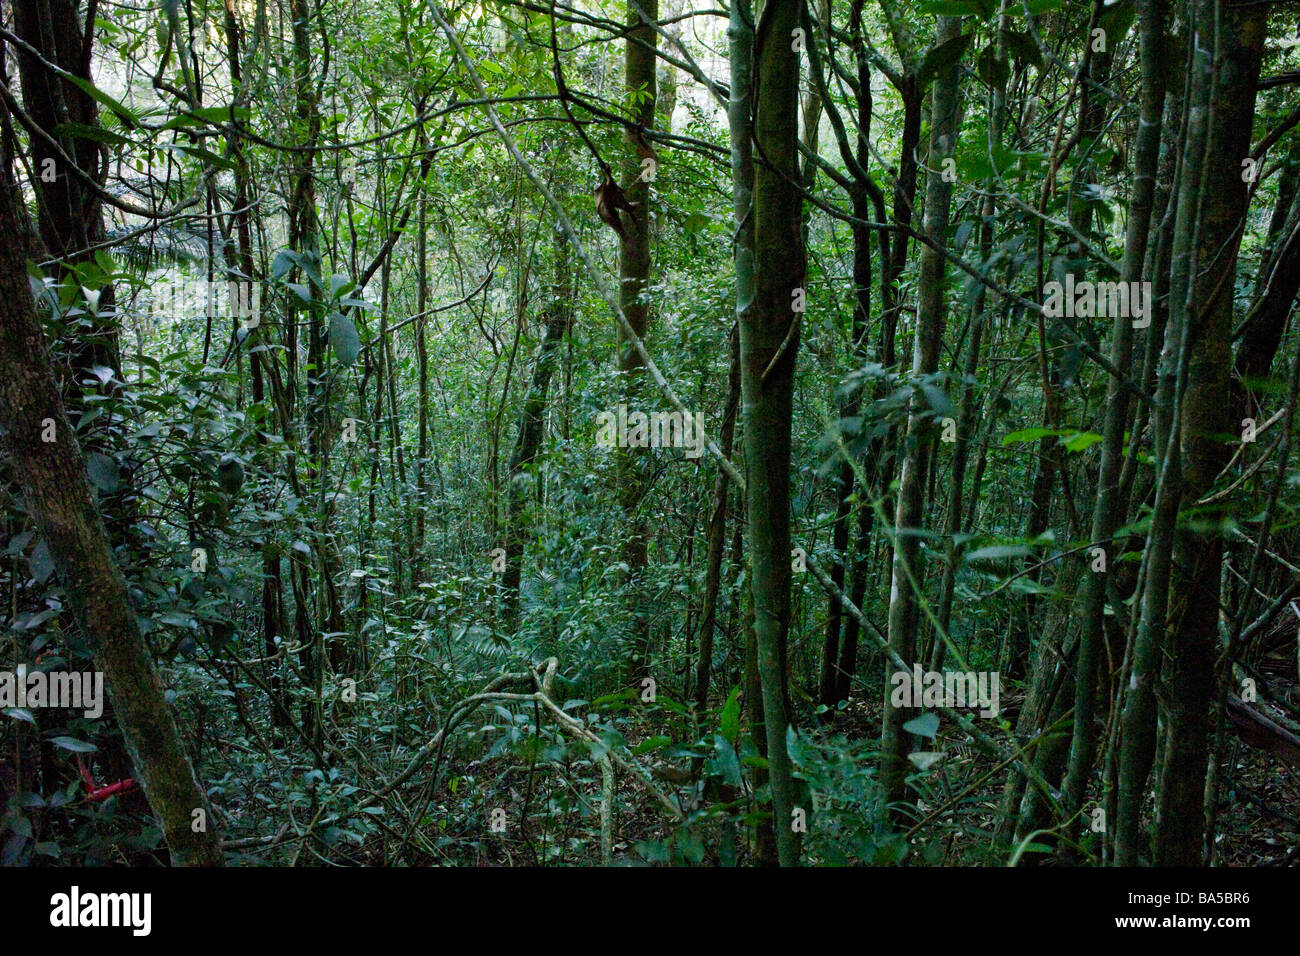 Tree trunks and vines in the jungle. Stock Photo